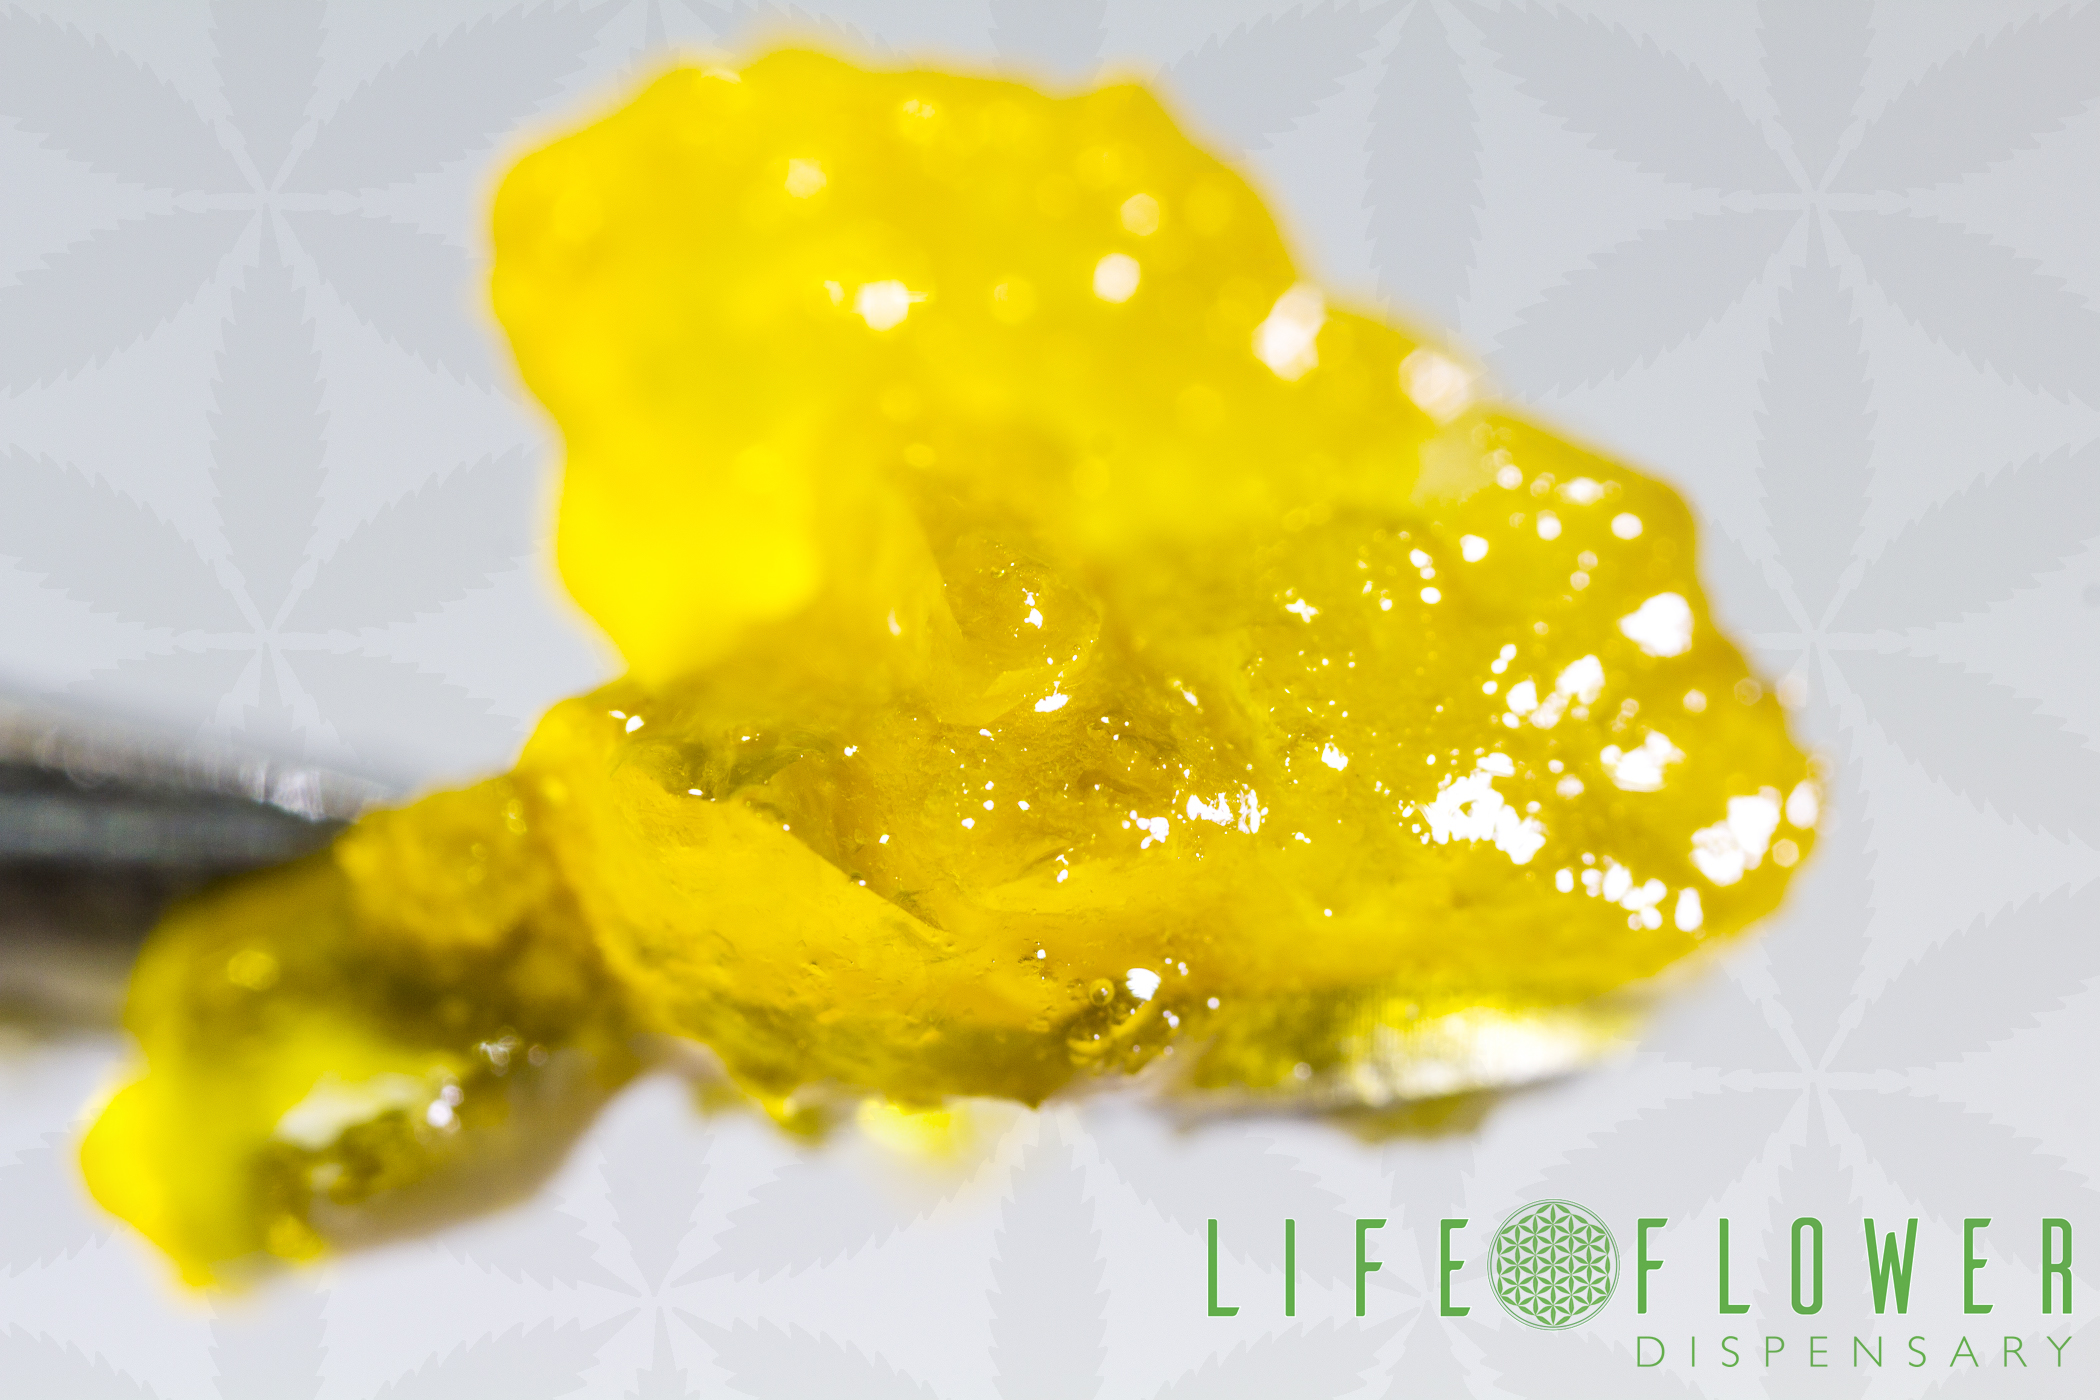 Quality Medical & Recreational Live Resin Extractions